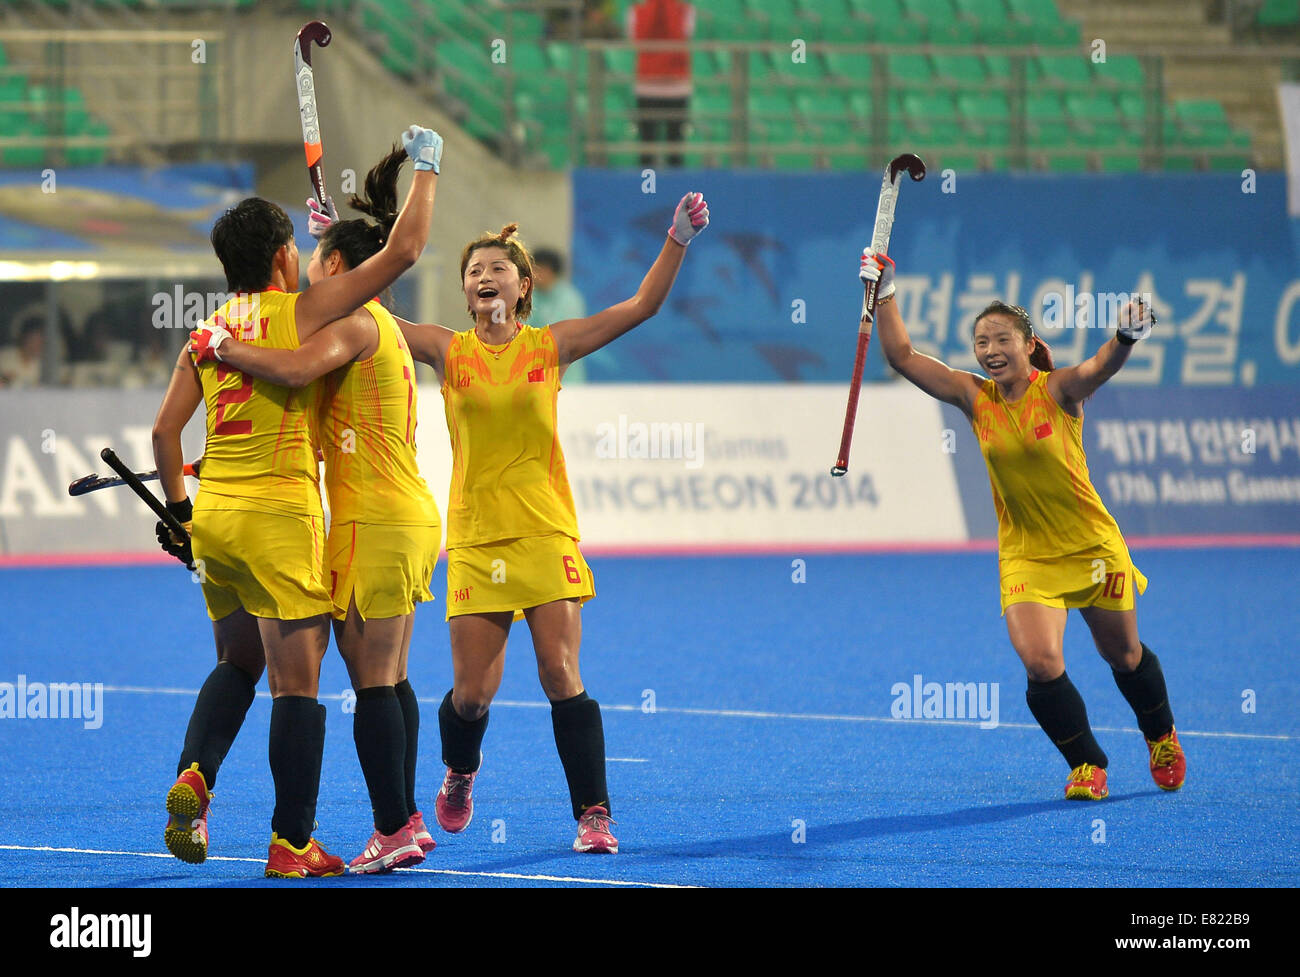 Incheon, South Korea. 29th Sep, 2014. Players of China celebrate after the women's hockey semifinal match against Japan at the 17th Asian Games in Incheon, South Korea, Sept. 29, 2014. China won 1-0. © Zhu Zheng/Xinhua/Alamy Live News Stock Photo